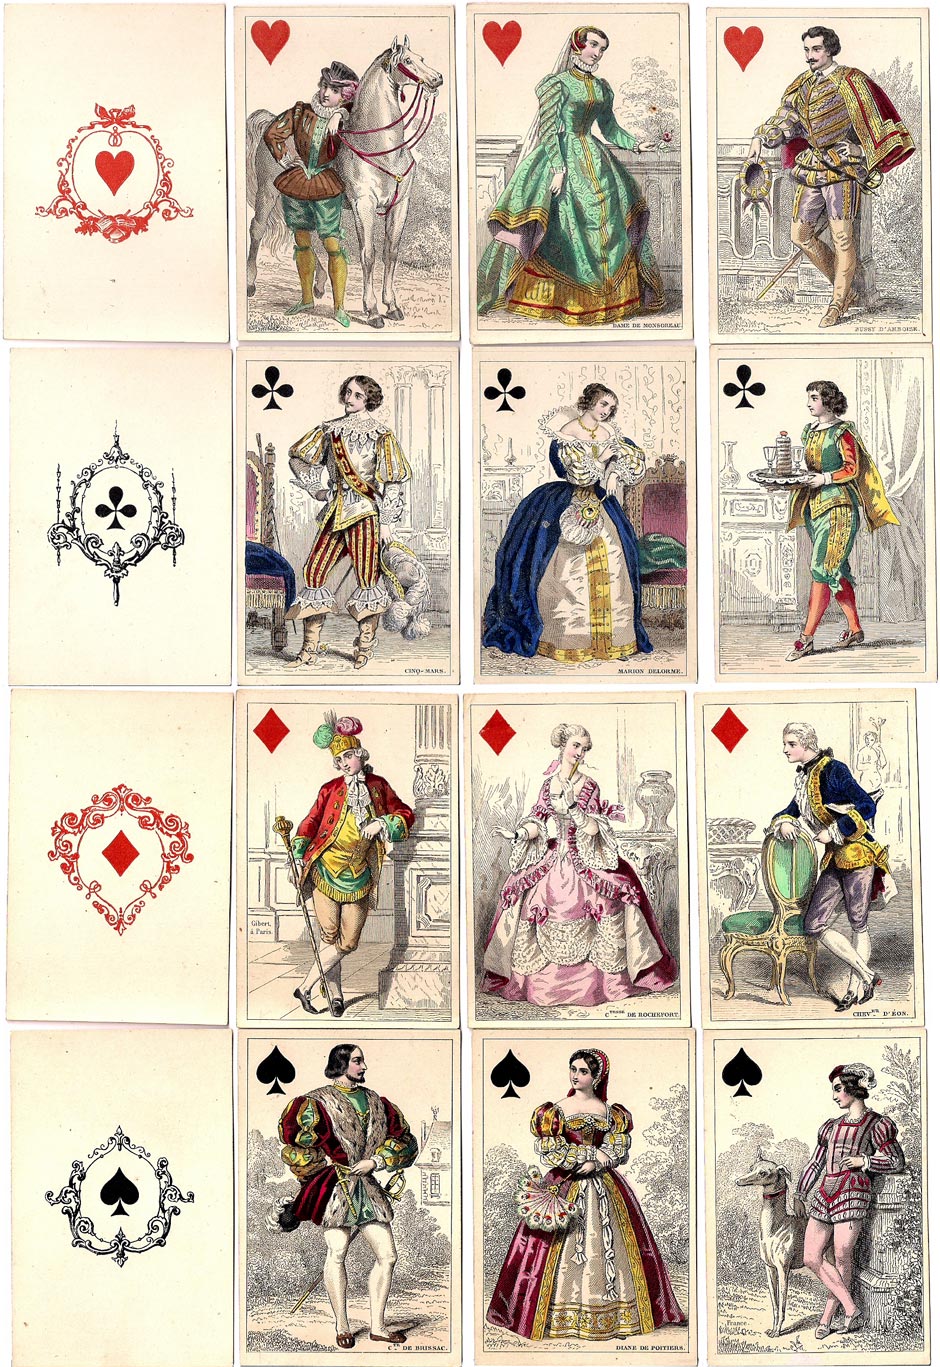 Historical Playing Cards by O. Gibert, Paris, c.1853